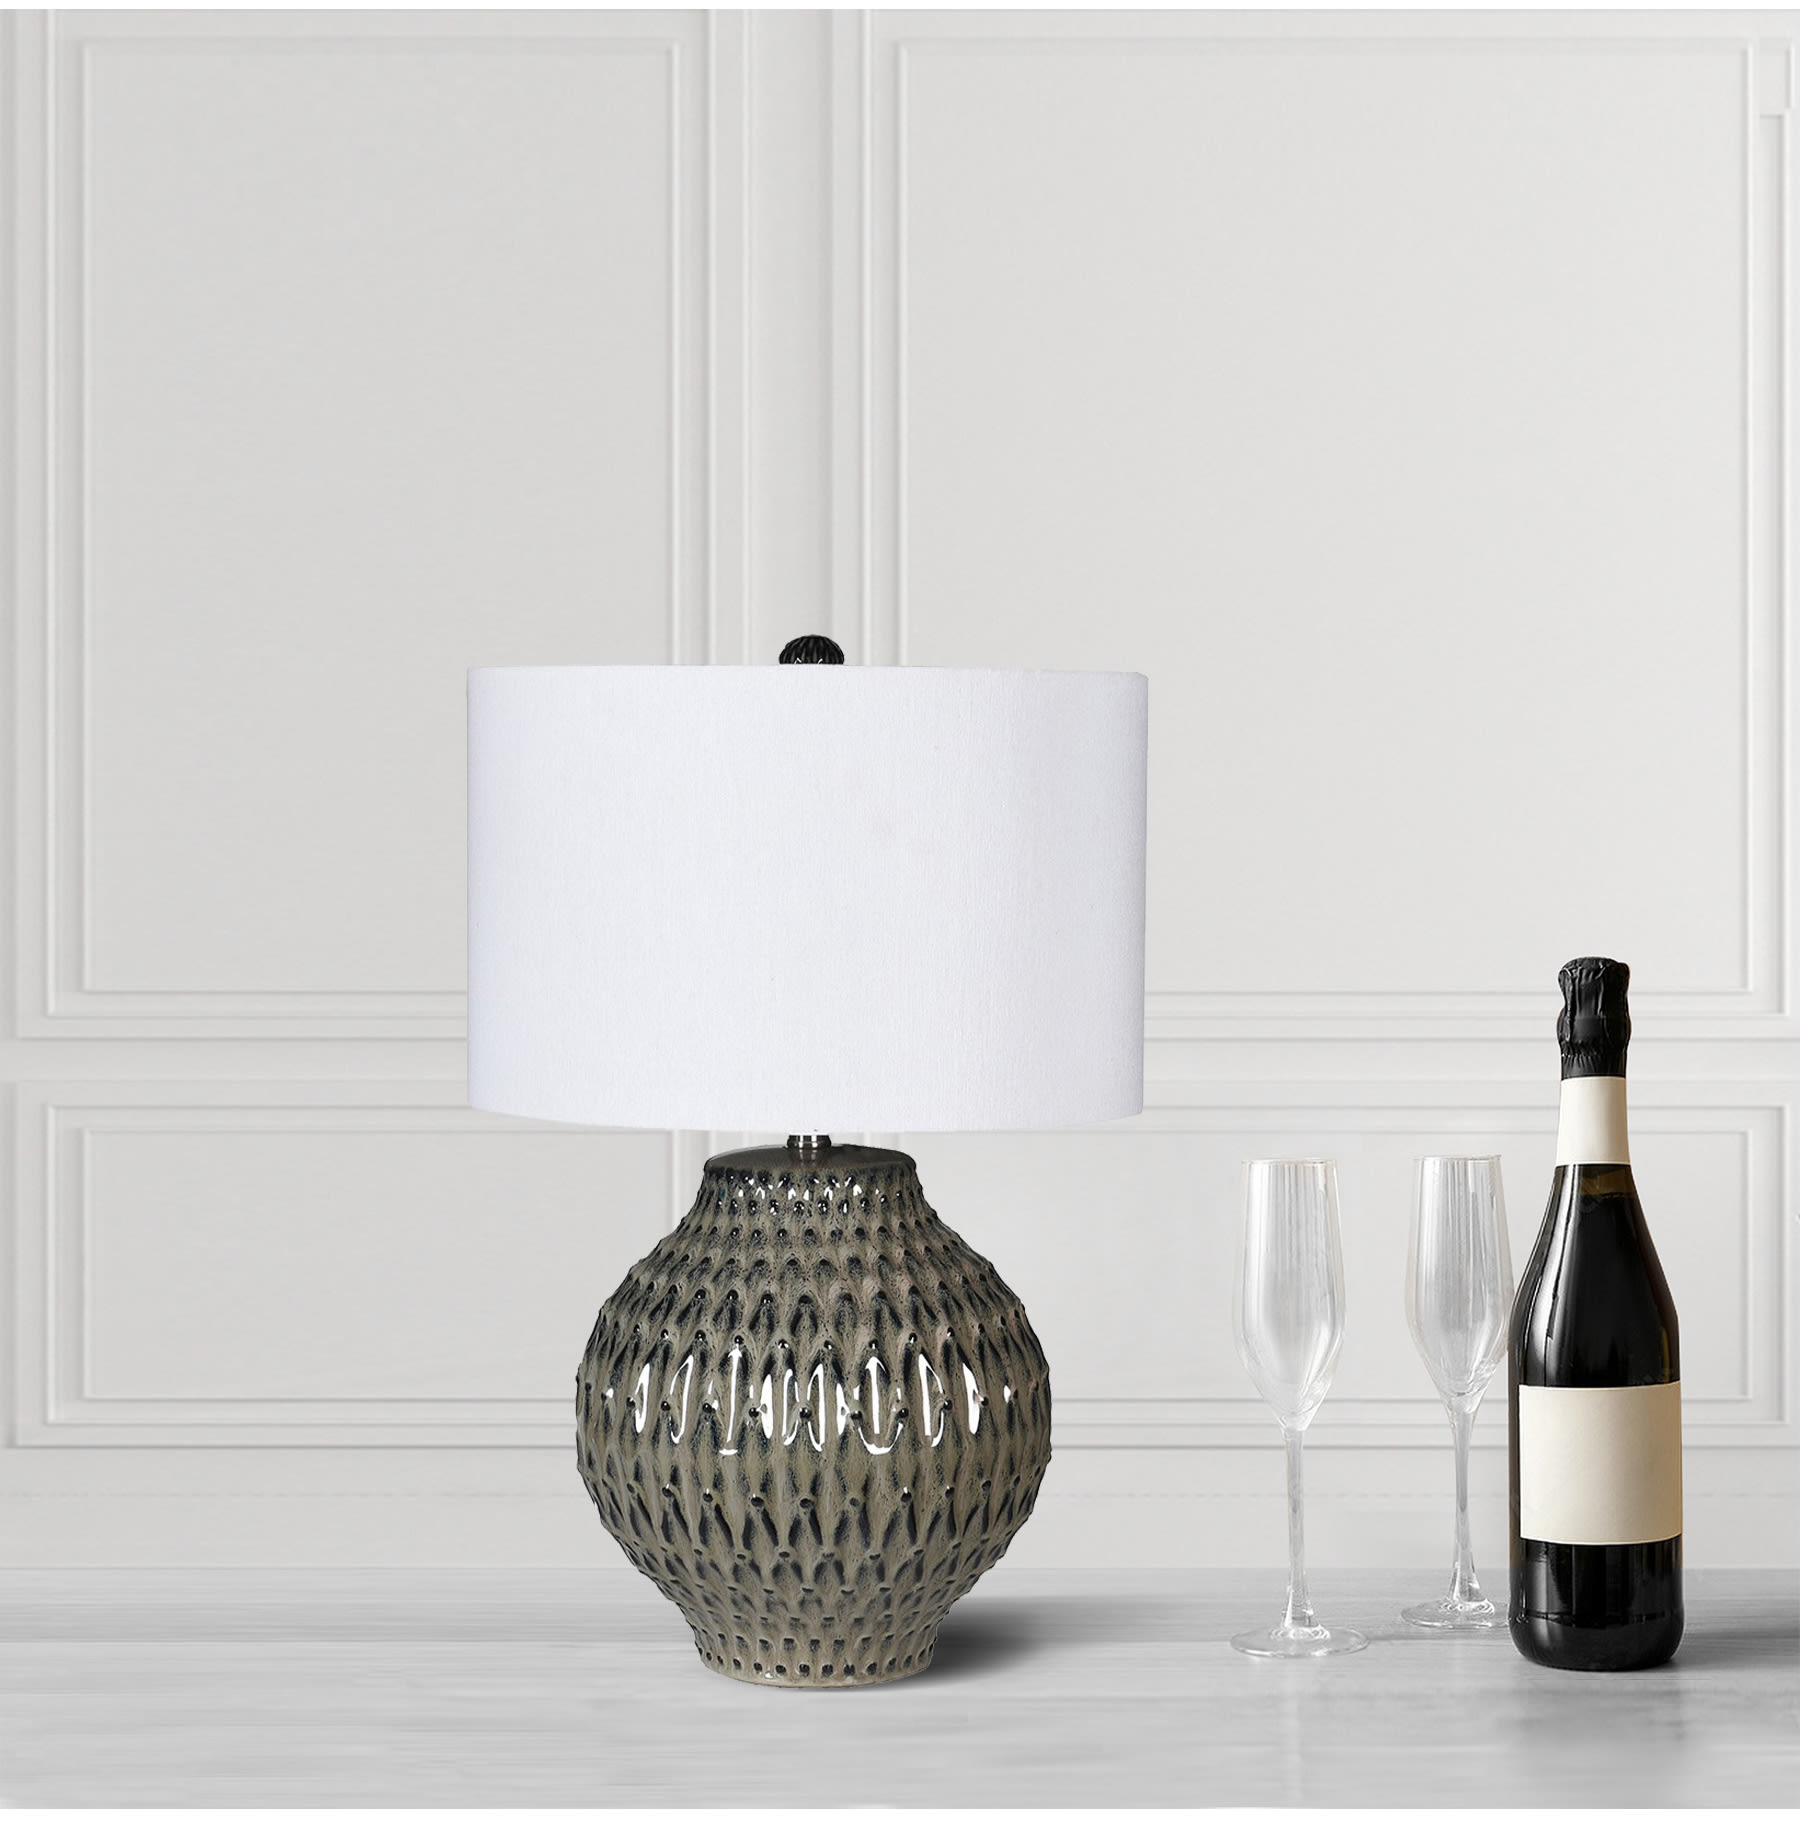 Dark Textured Table Lamp with White Linen Shade